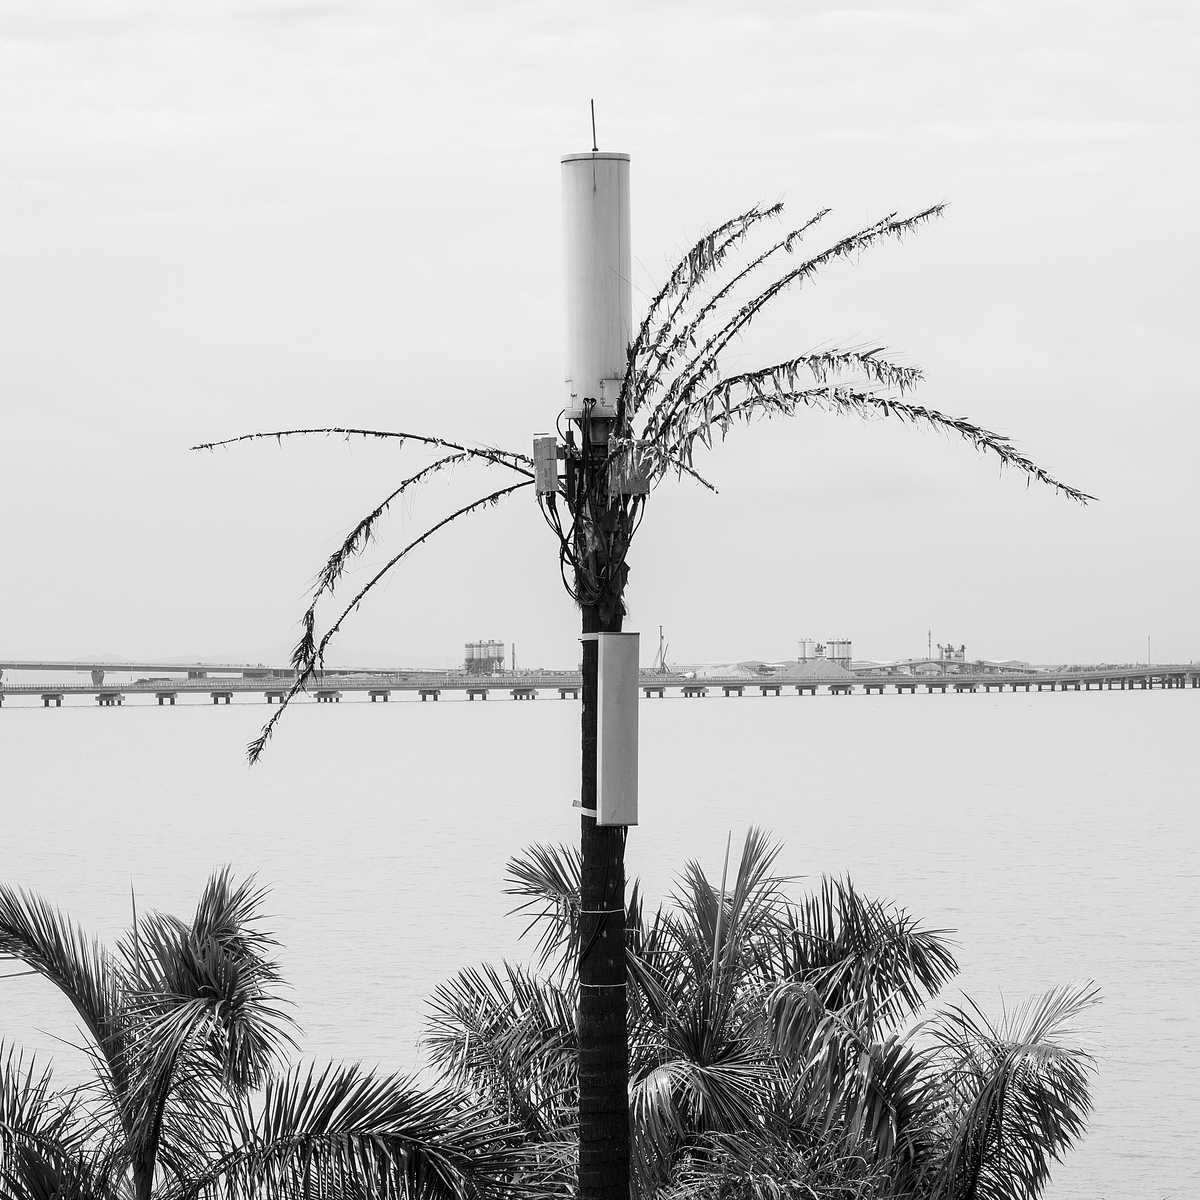 Photograph of an arborescent telecommunications tower in Zhuhai, China.